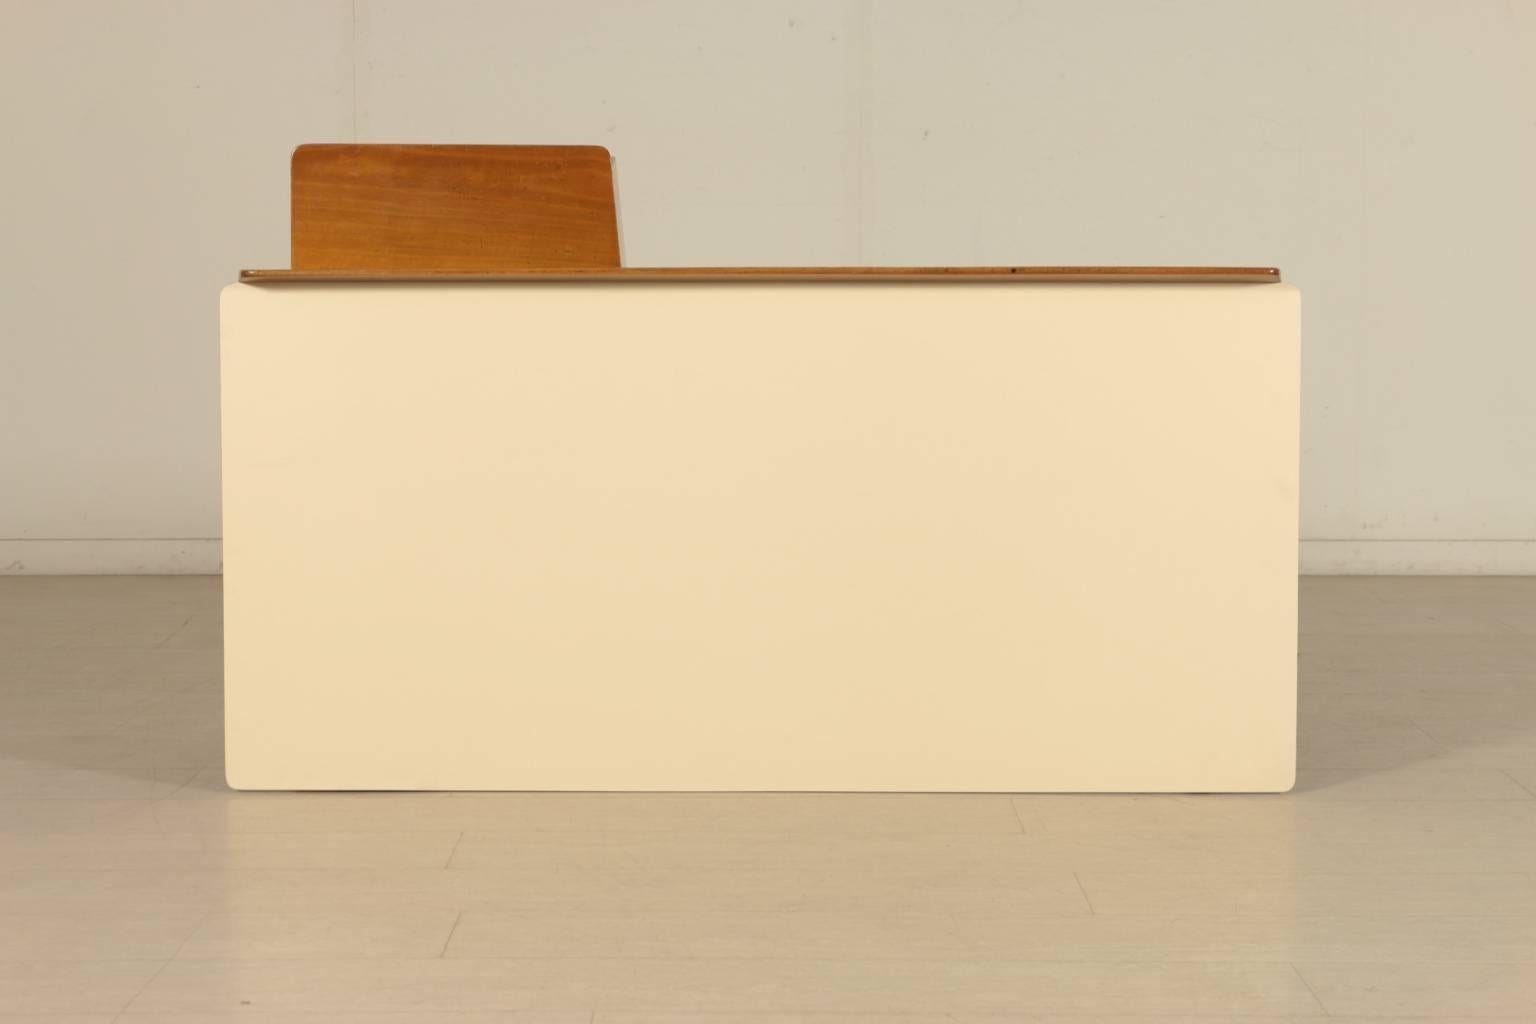 A desk attributed to Vittorio Dassi, mahogany, top covered with formica. Manufactured in Italy, 1950s.